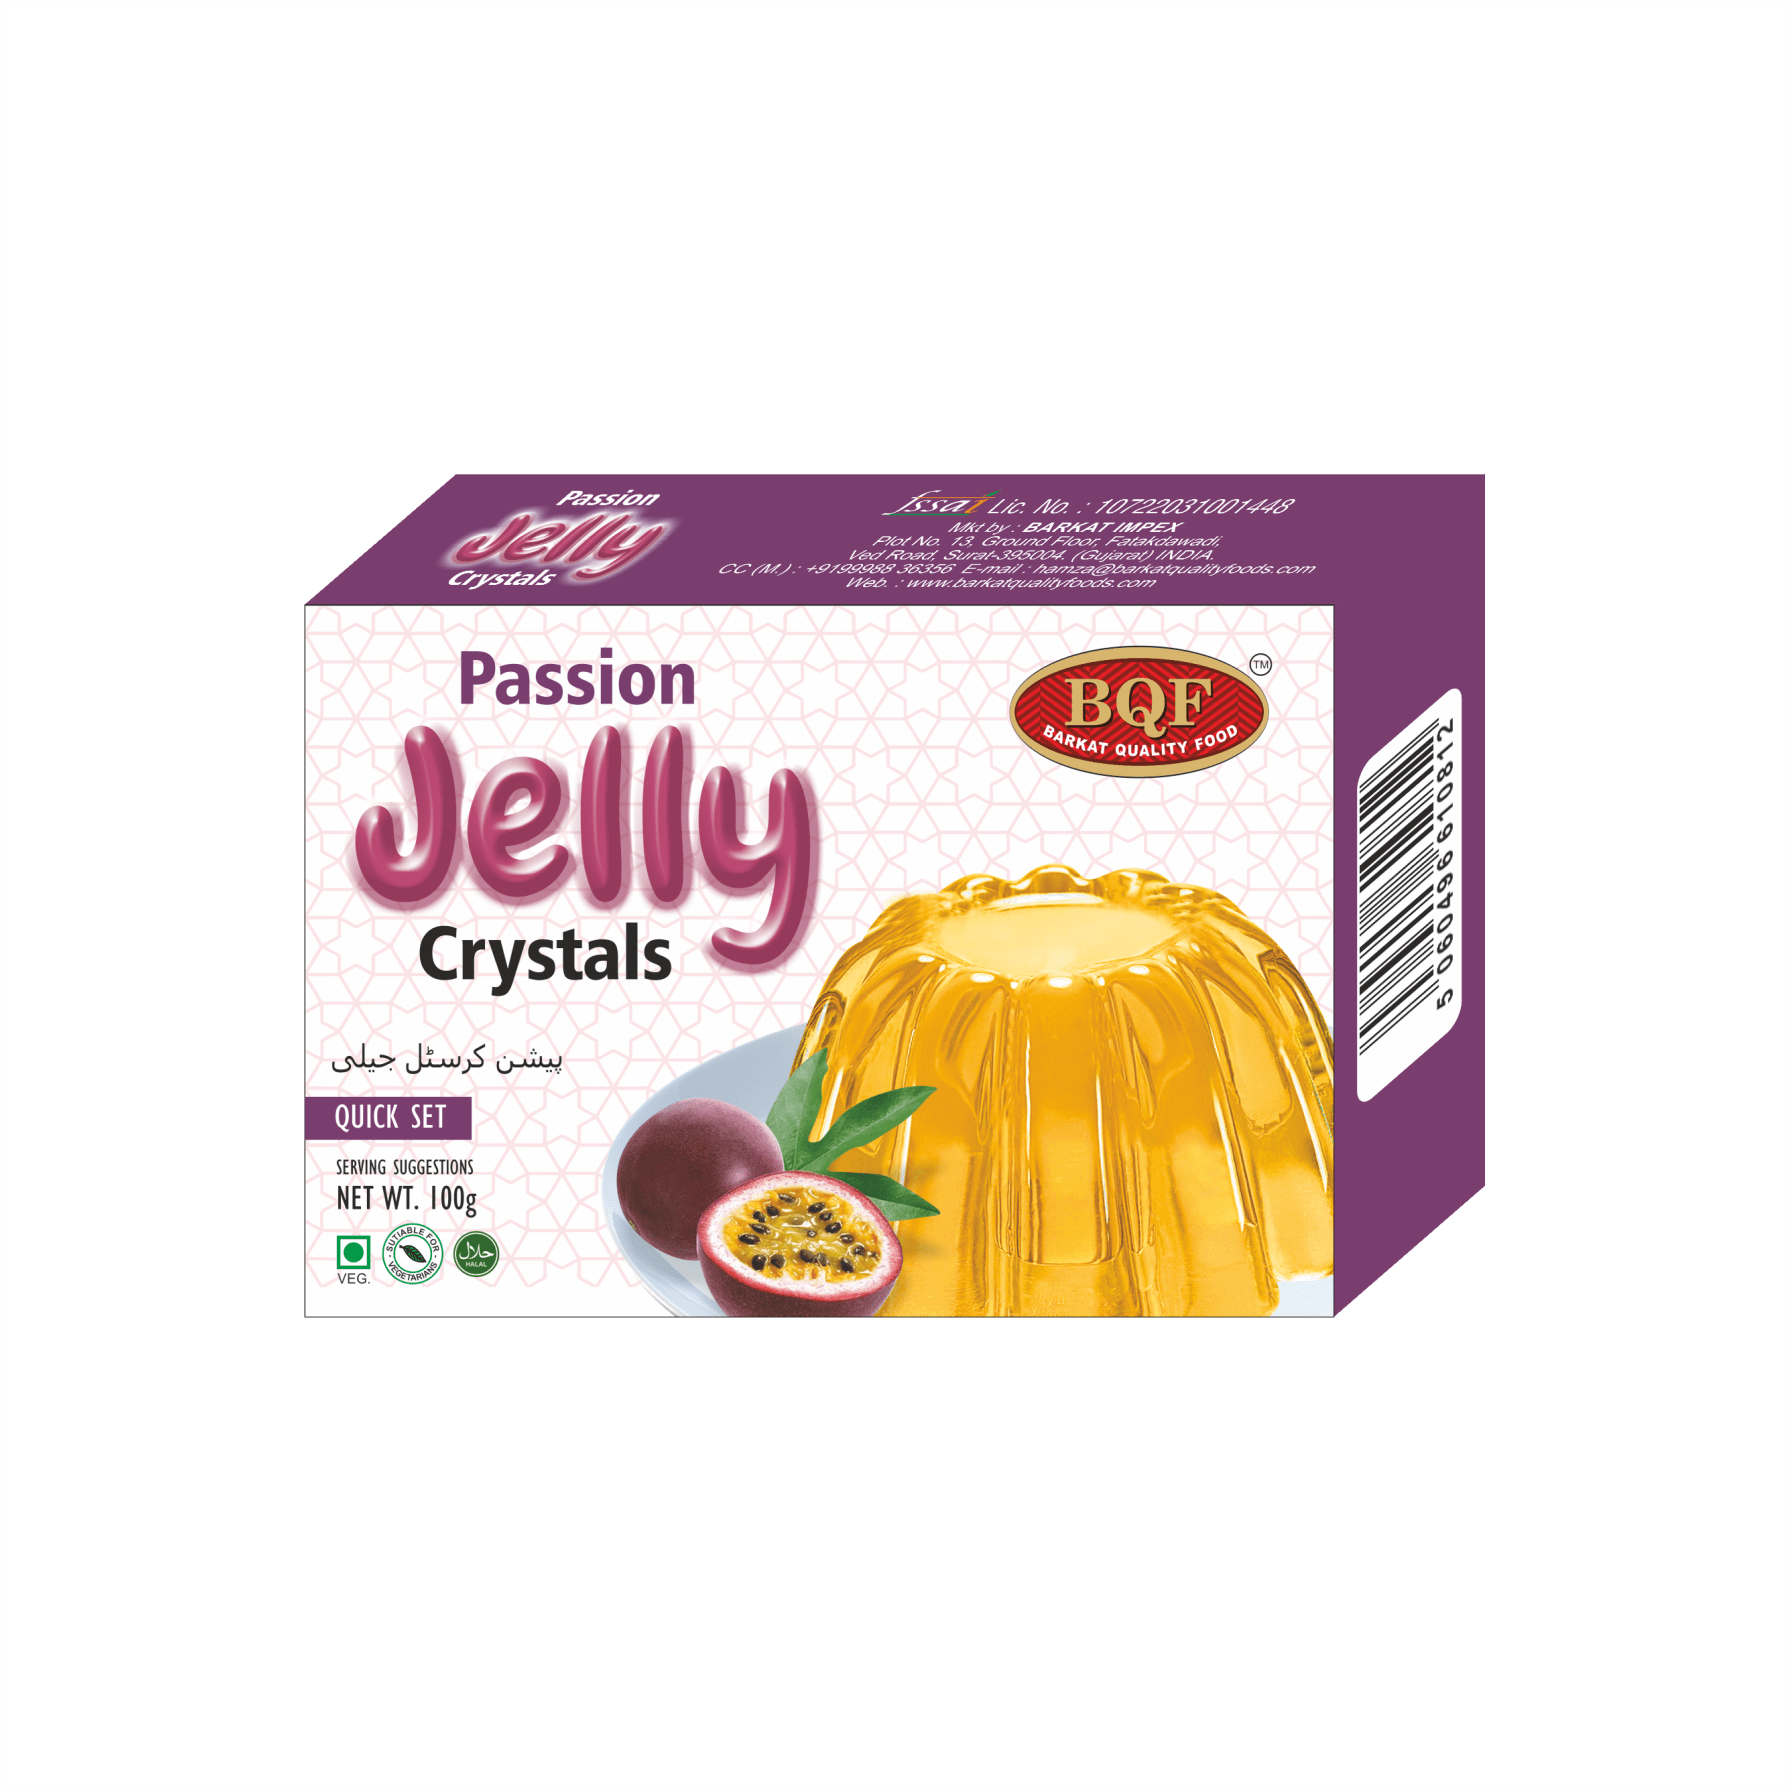 PASSION JELLY